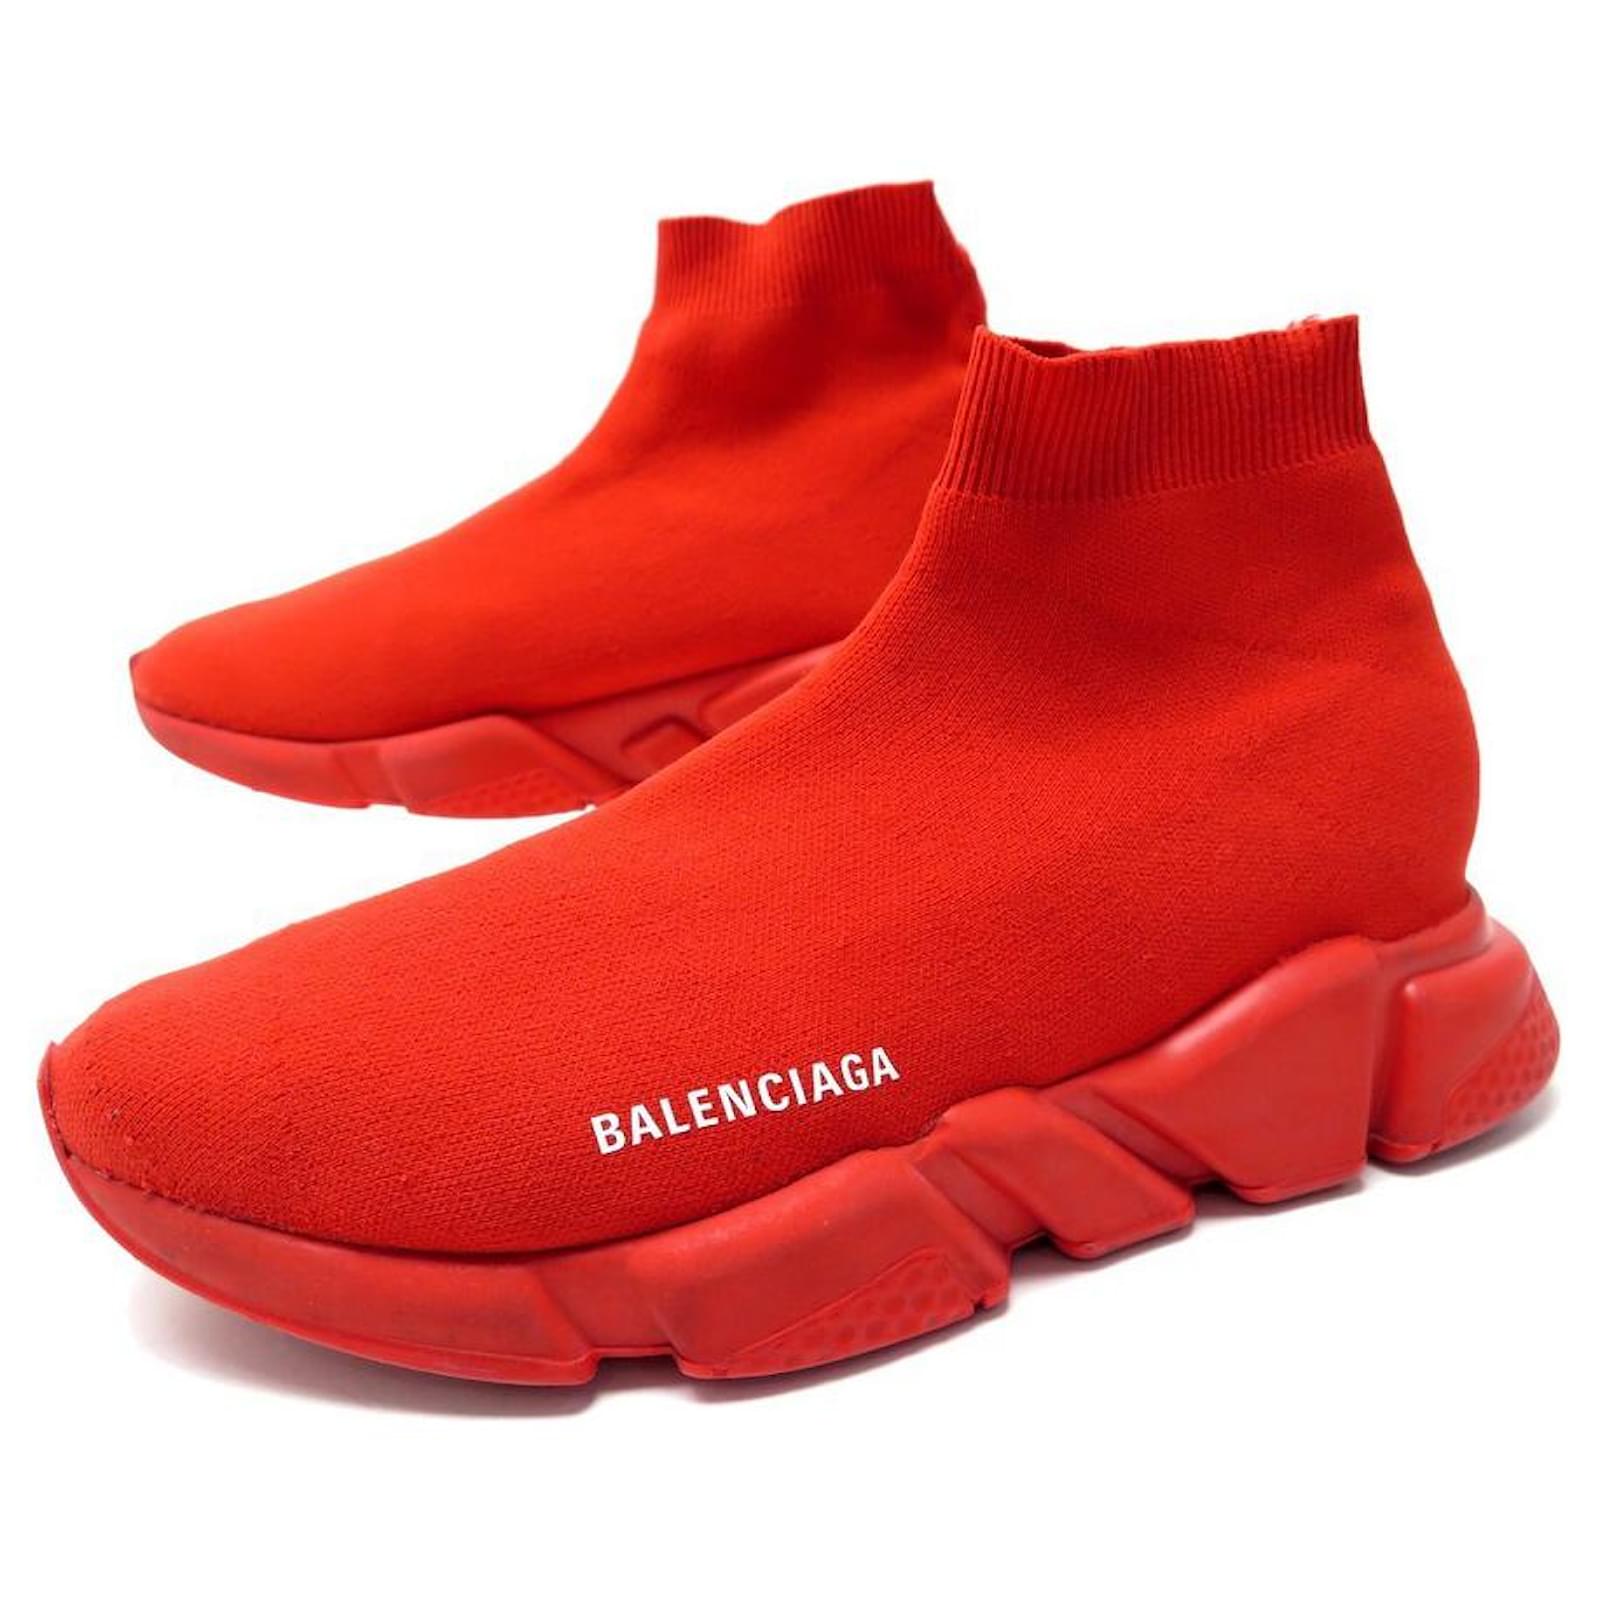 CHAUSSURES BALENCIAGA SPEED 530353 BASKETS 43 EN TOILE ROUGE SHOES